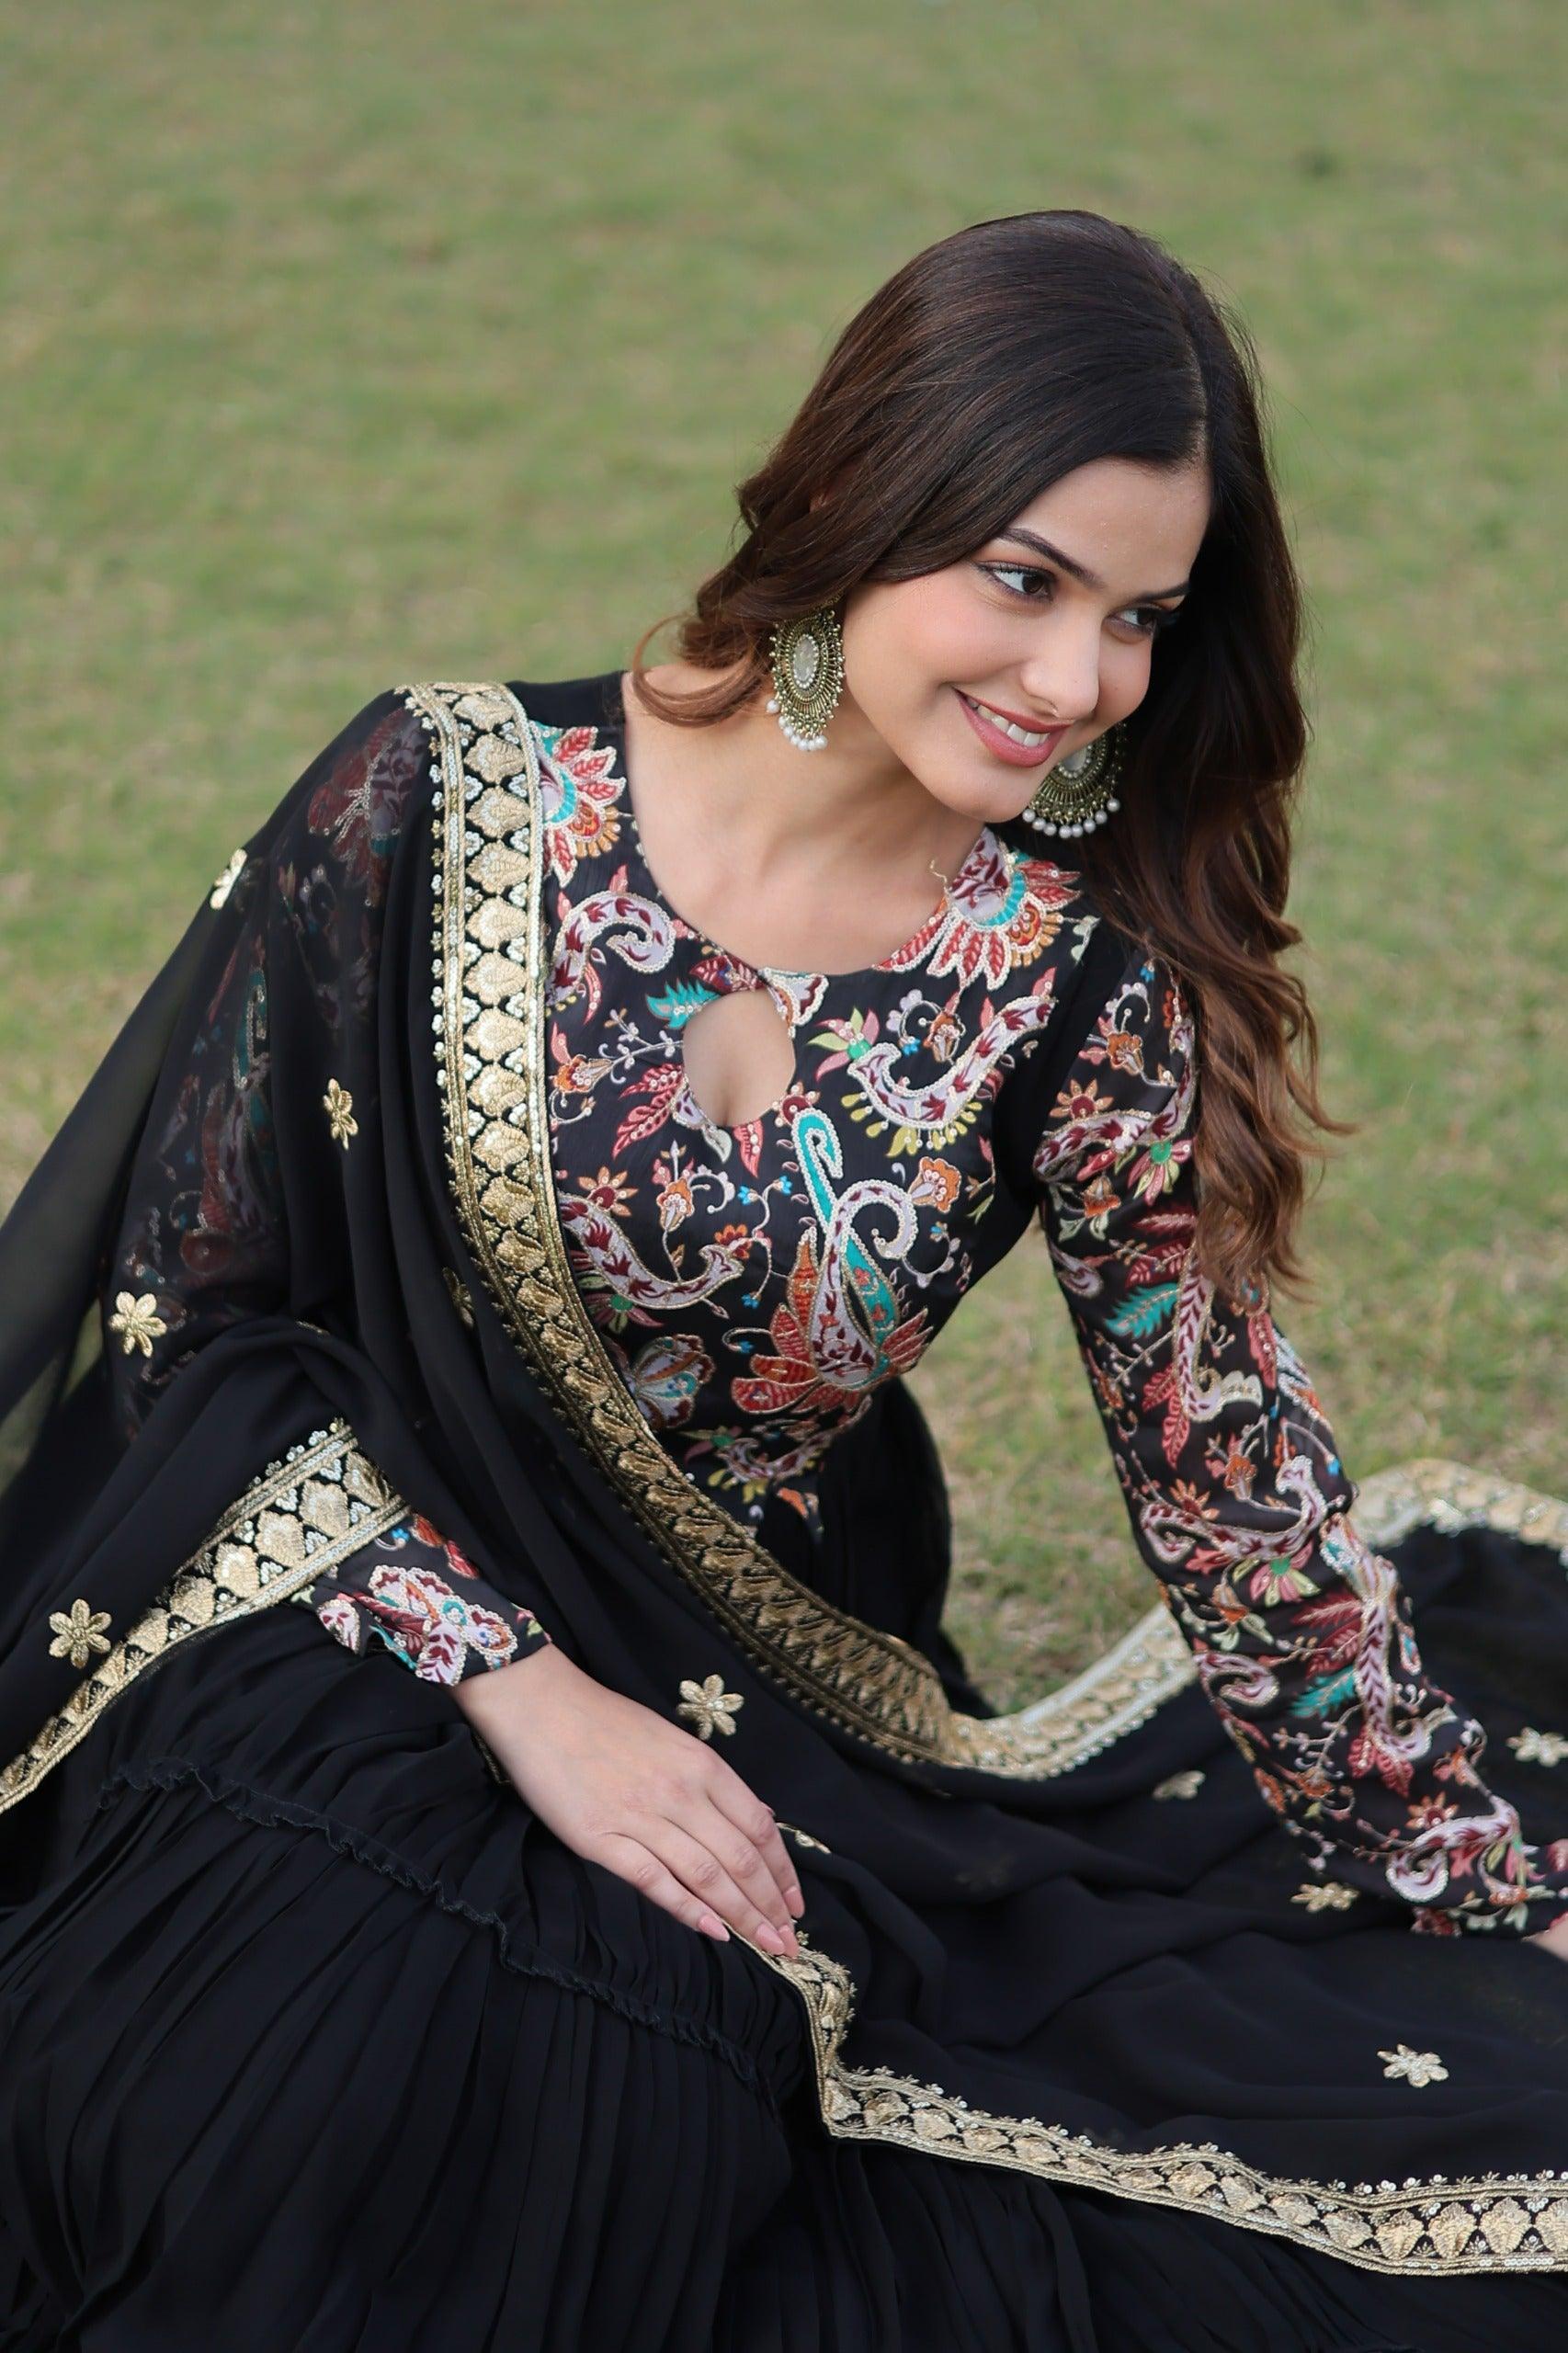 Black Floral Fantasy Gown-Dupatta Collection - Inayakhan Shop 